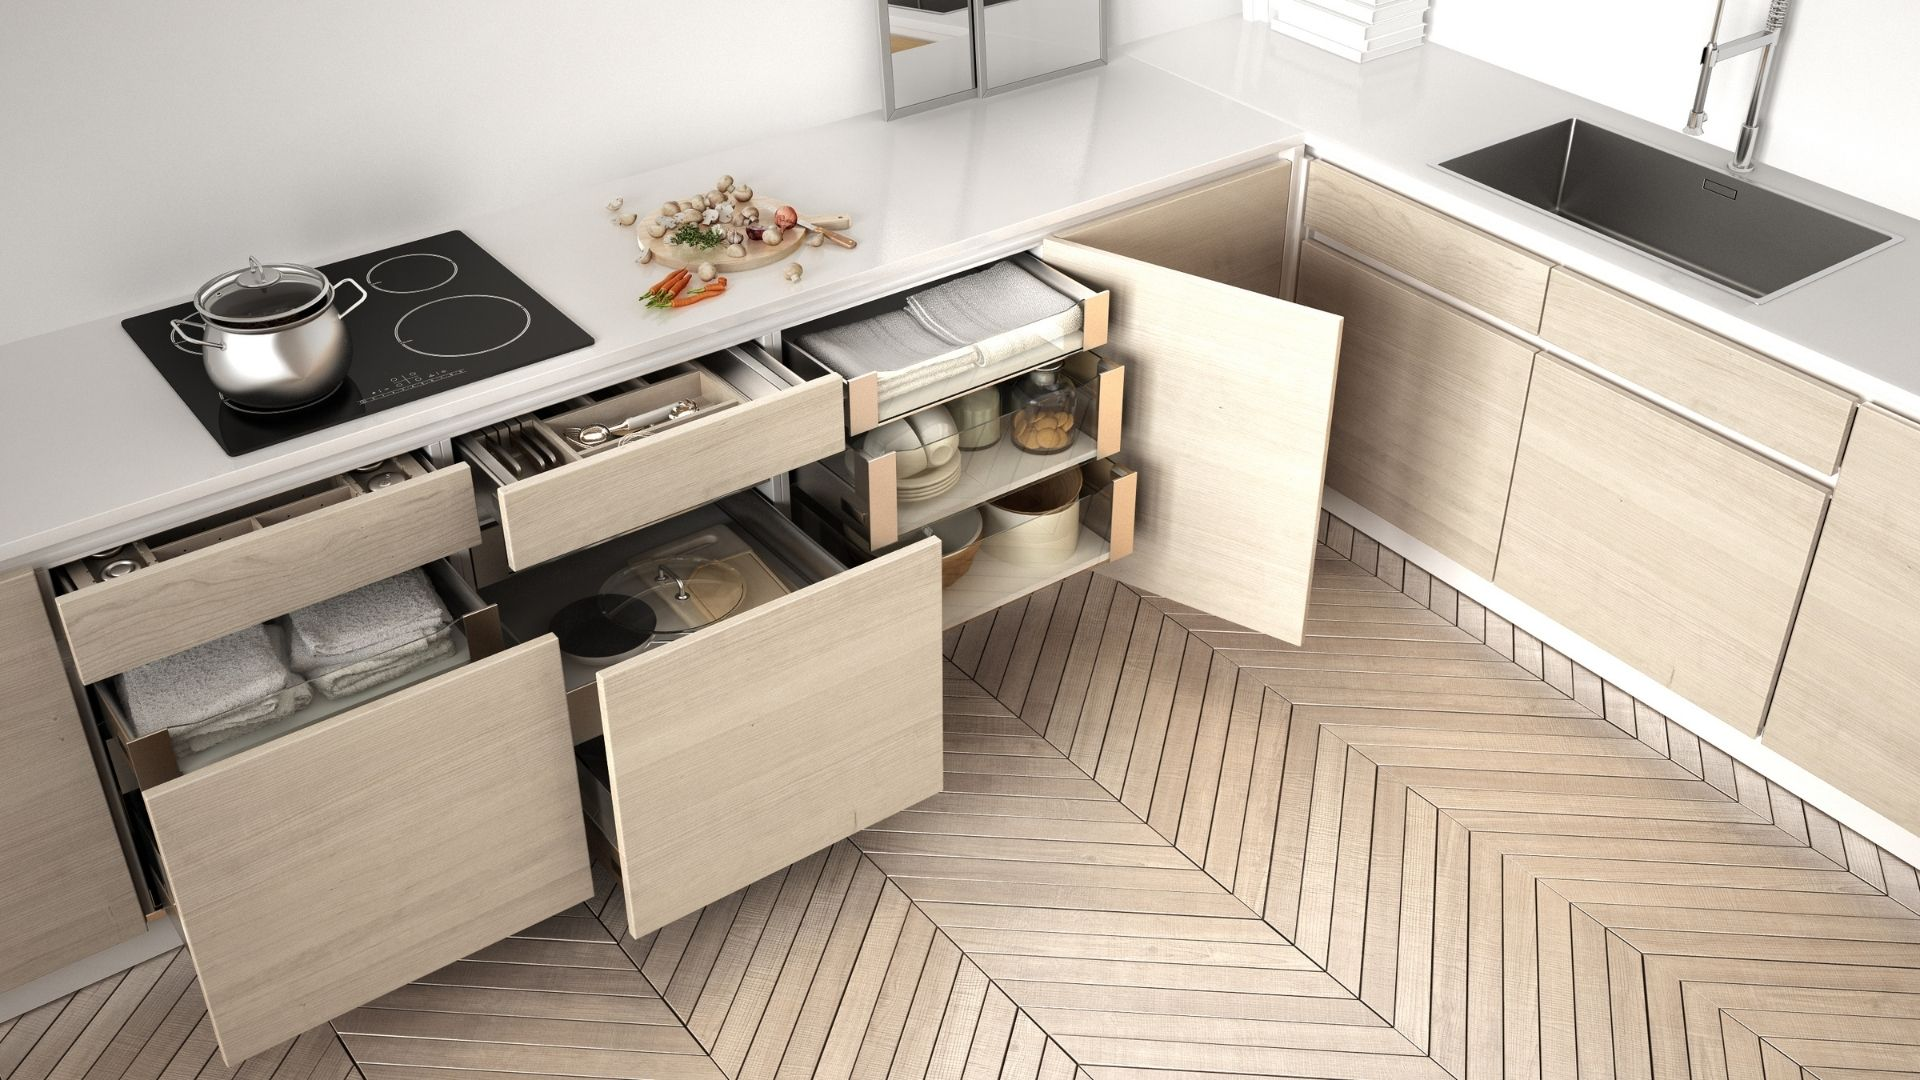 Kitchen cabinets with smart storage solutions